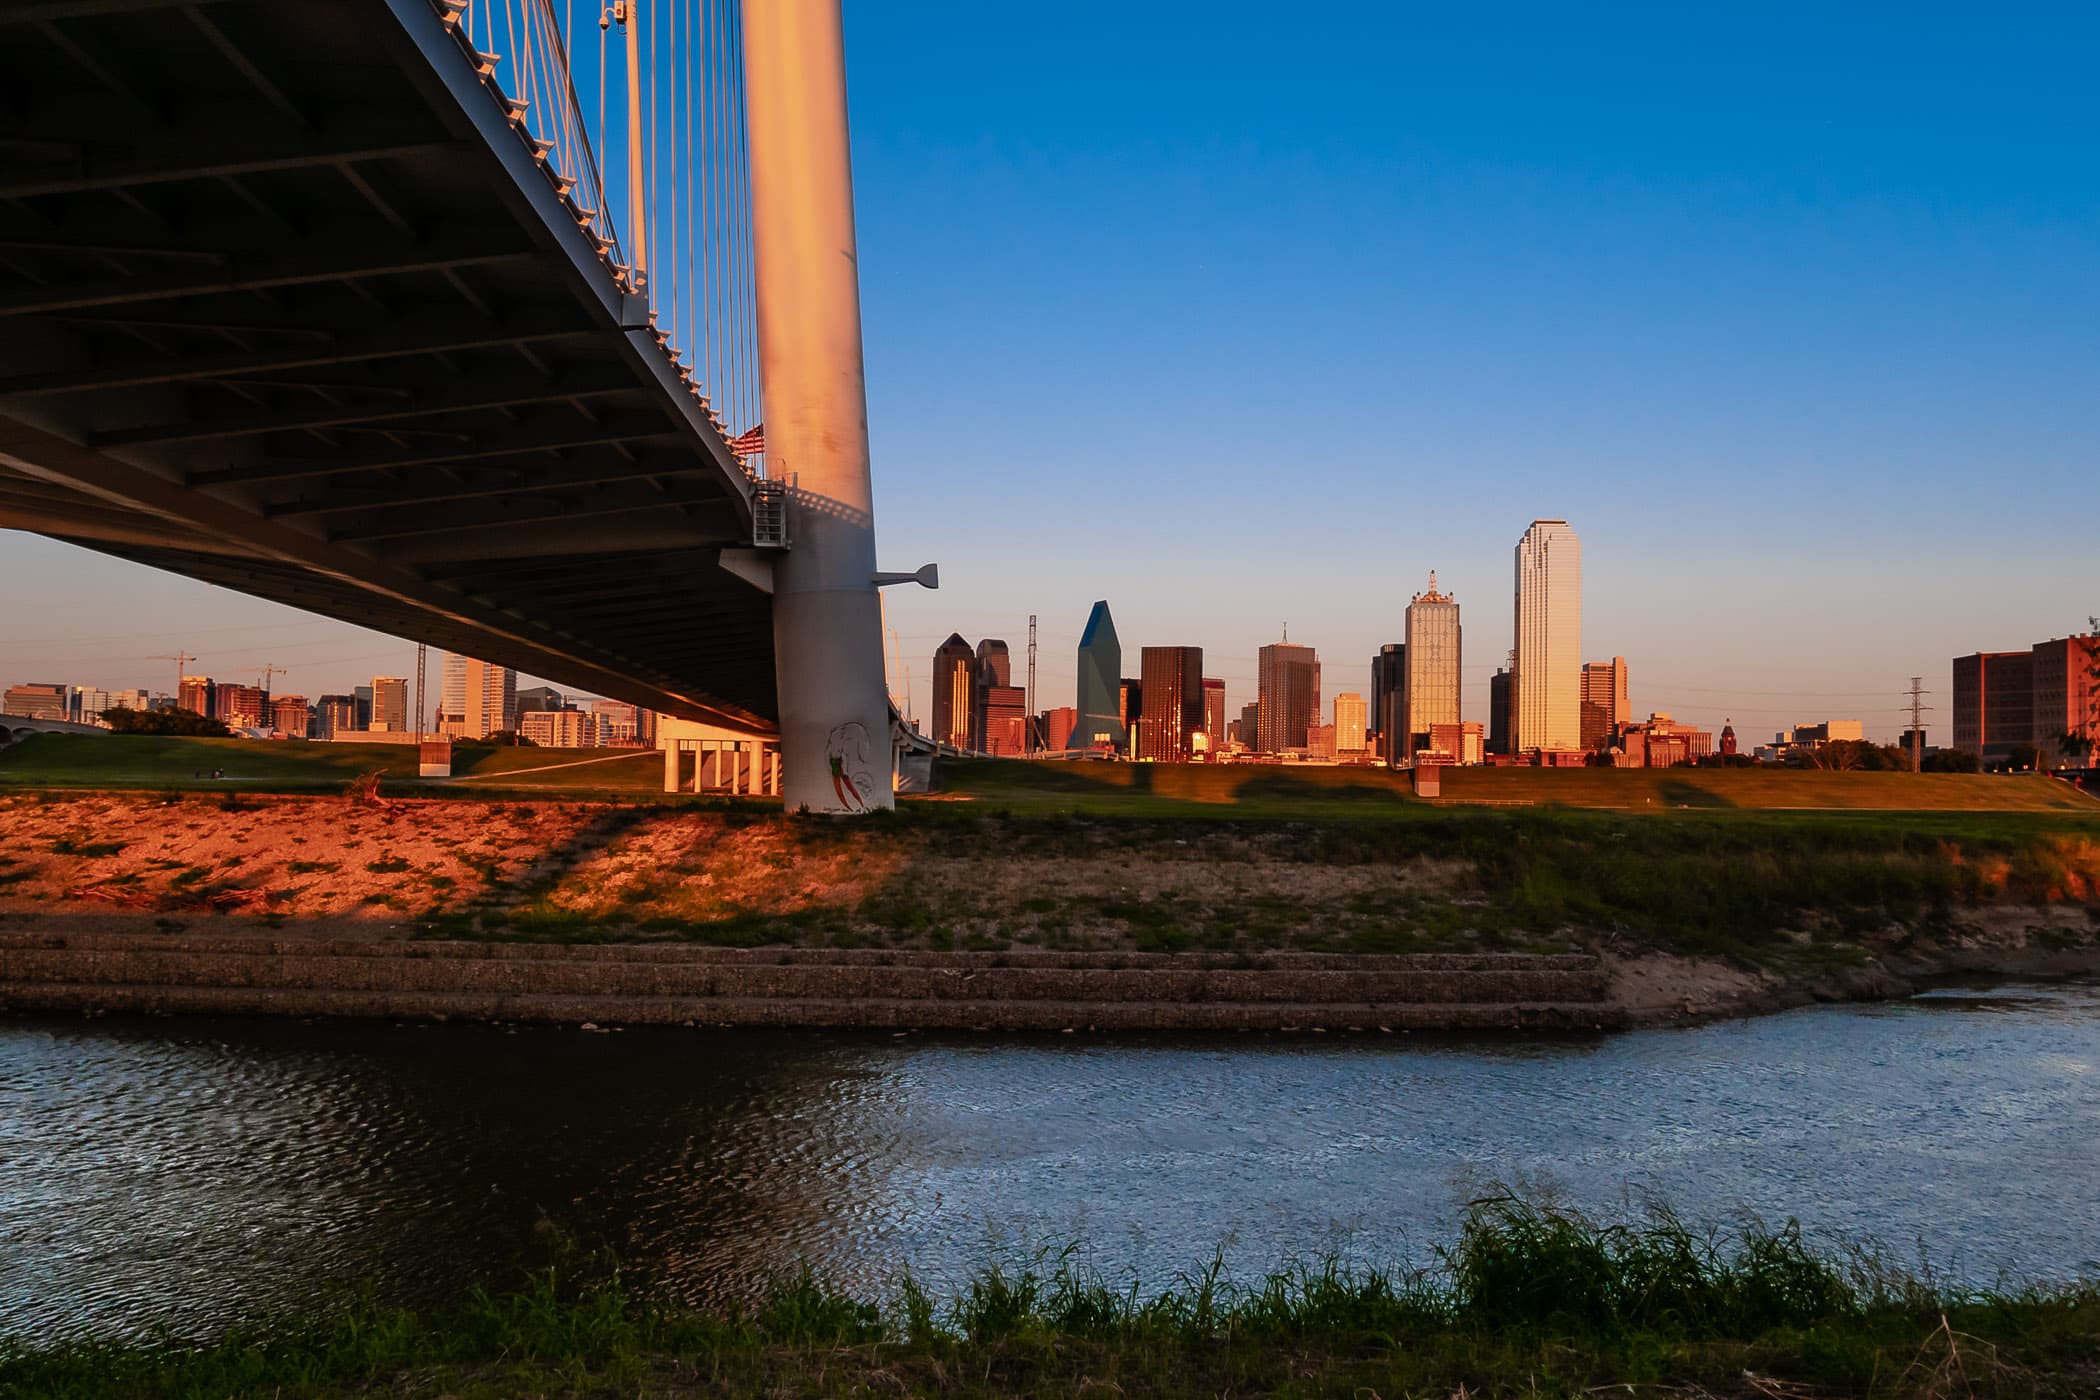 The Margaret Hunt Hill Bridge reaches over the Trinity River towards Downtown Dallas.